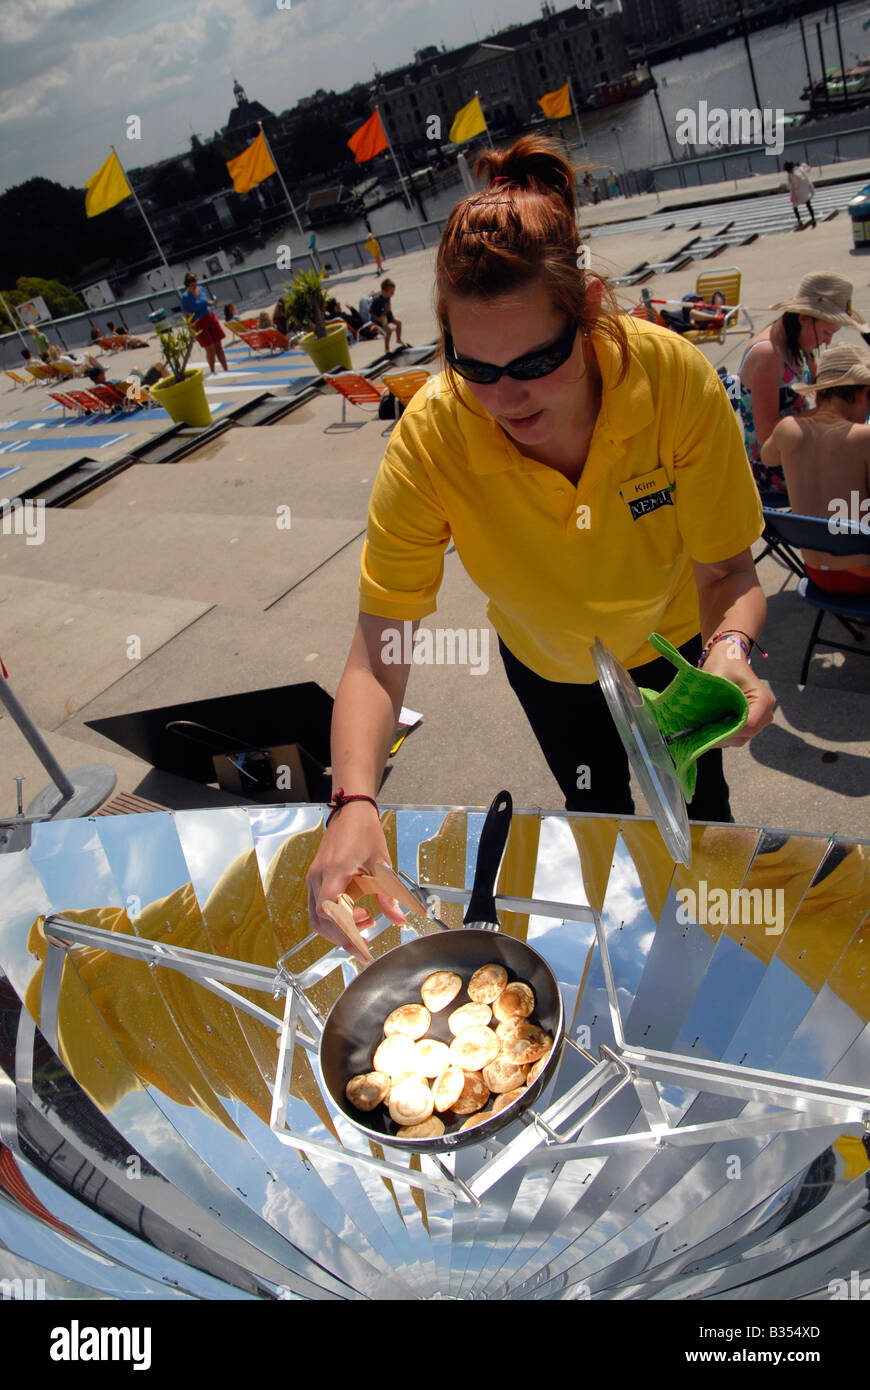 A parabolic solar oven being demonstrated on the roof of the Nemo science centre in Amsterdam, Holland Stock Photo